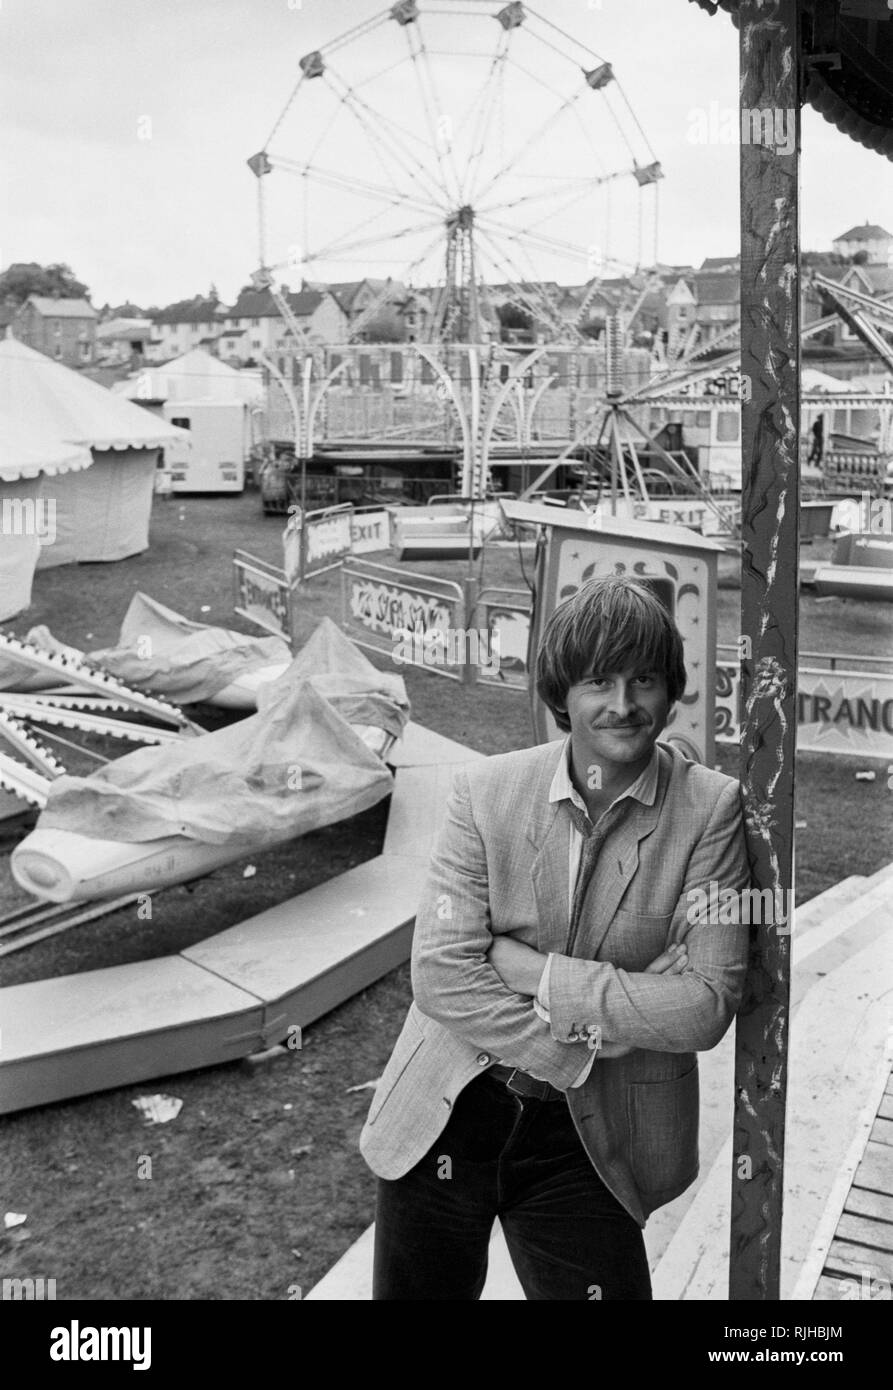 Trevor Eve, star of the BBC series 'Shoestring', taking time off on location at the fair in Glastonbury, Somerset. Stock Photo